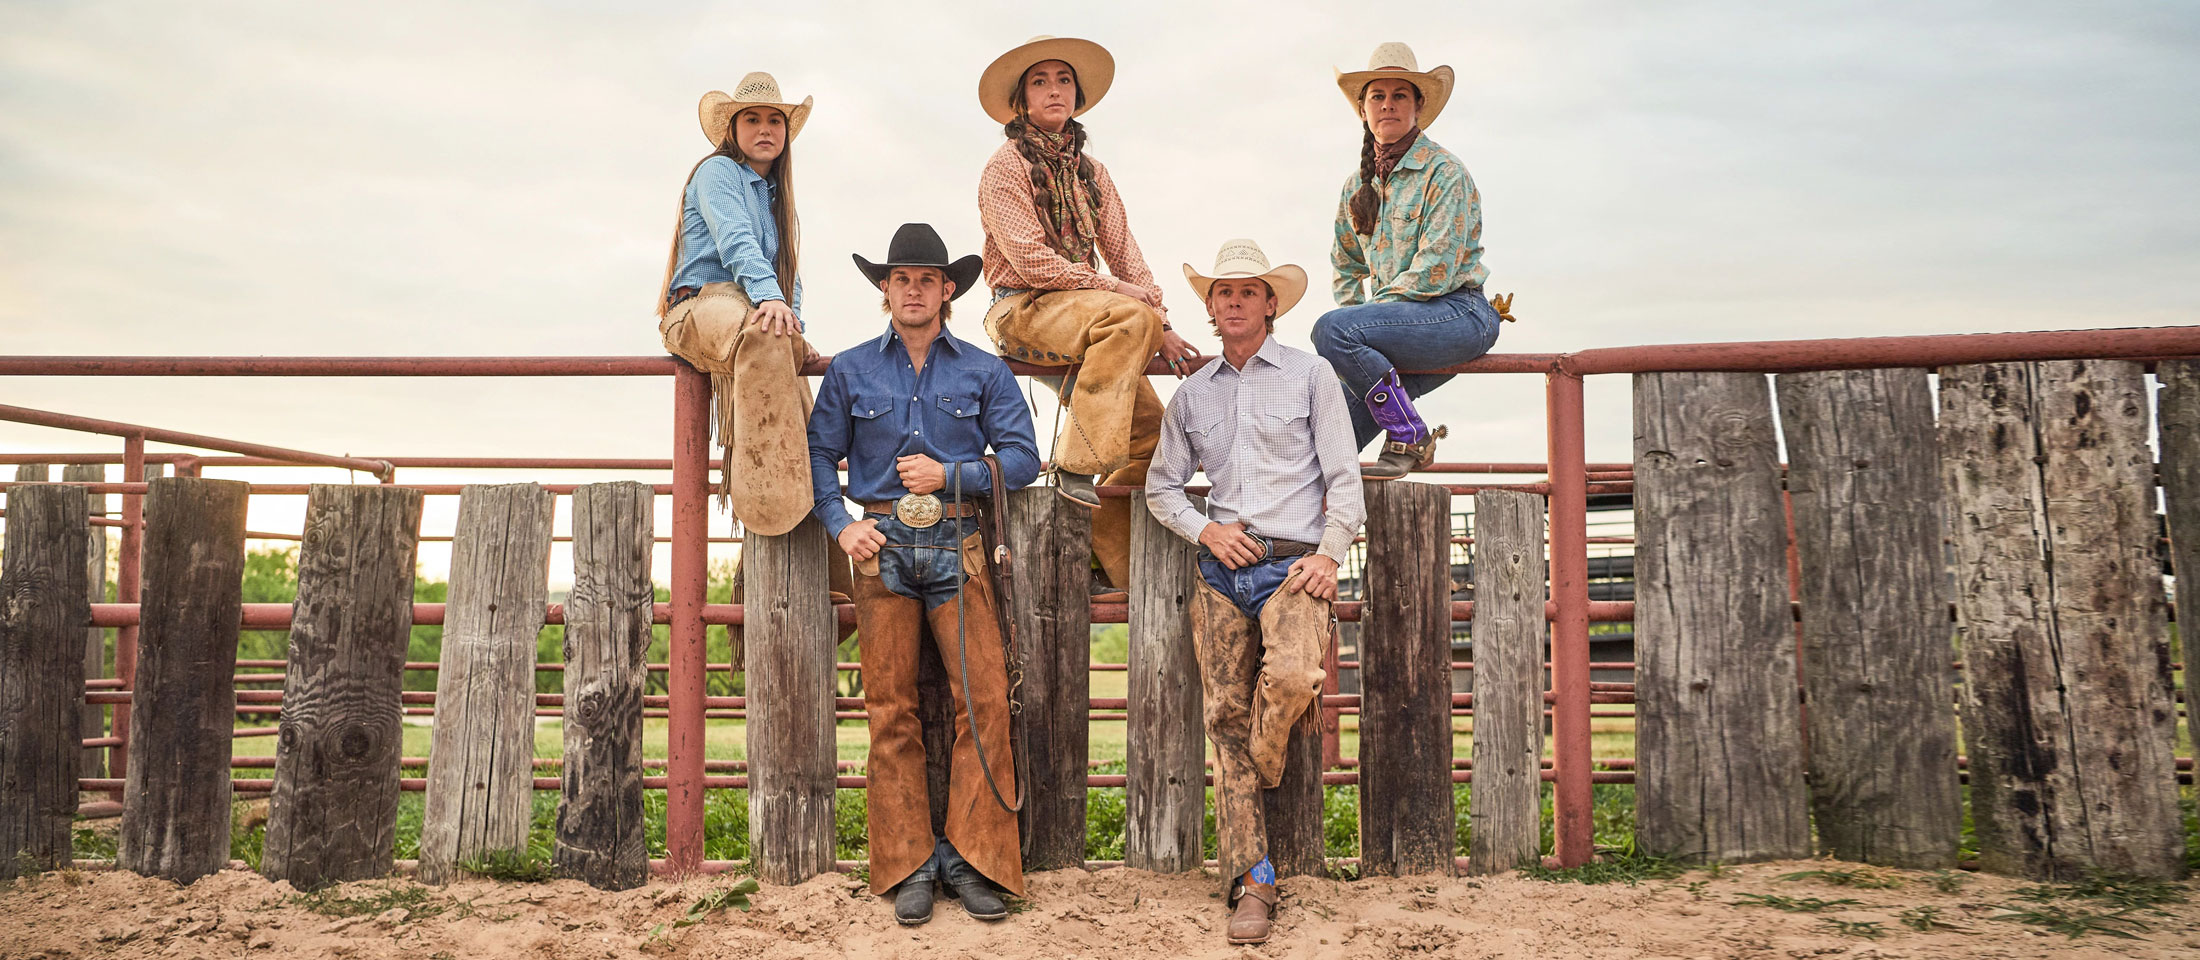 Three women and two men at a ranch wearing jeans, a shirt, cowboy hat, and cowboy boots.